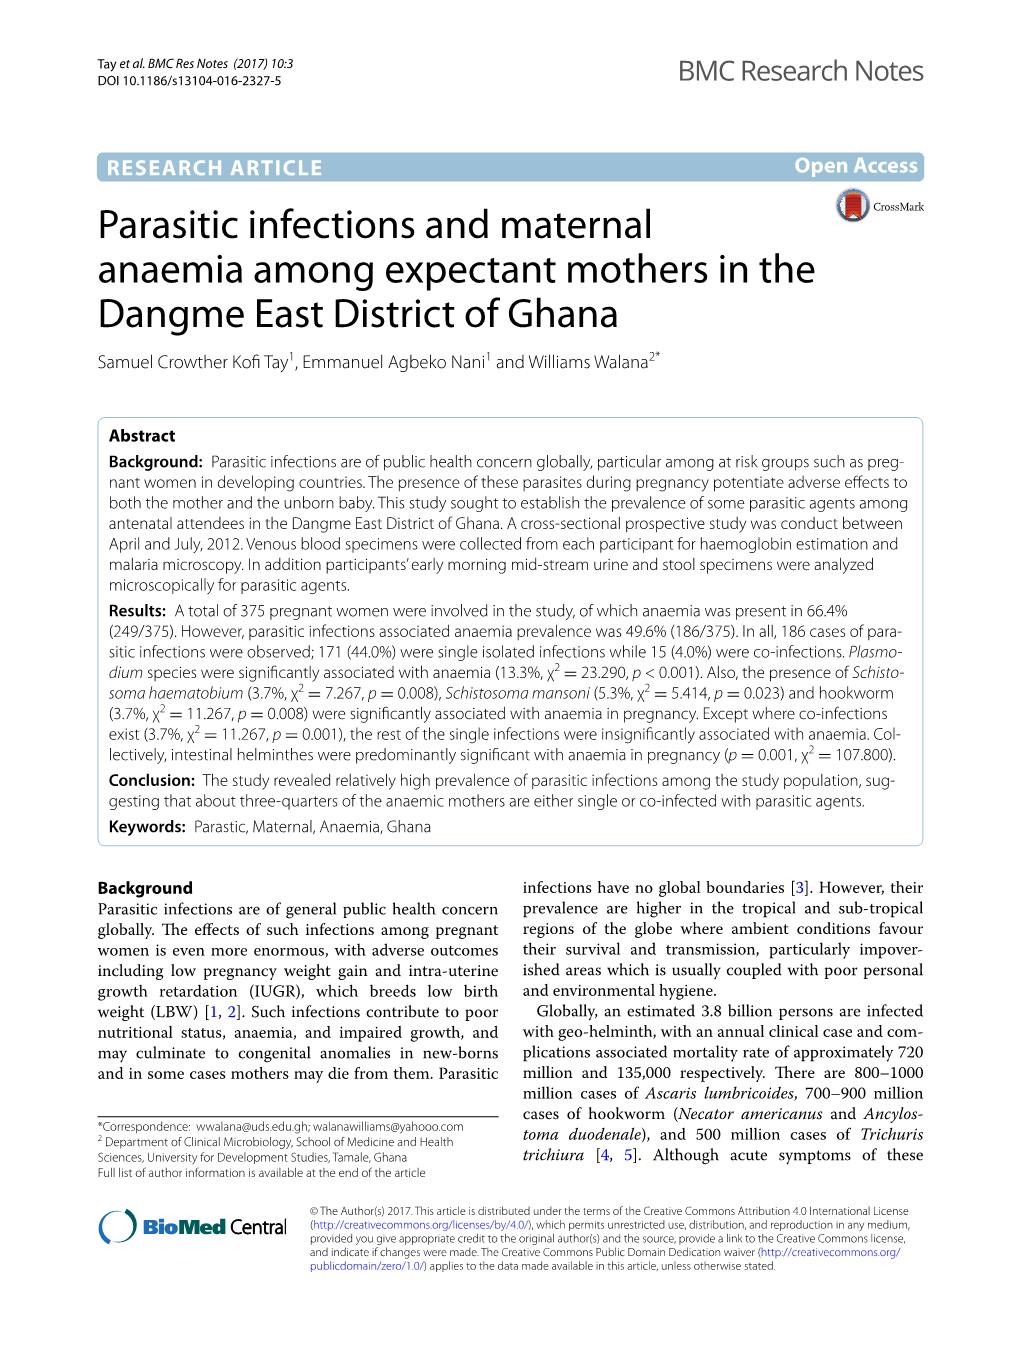 Parasitic Infections and Maternal Anaemia Among Expectant Mothers